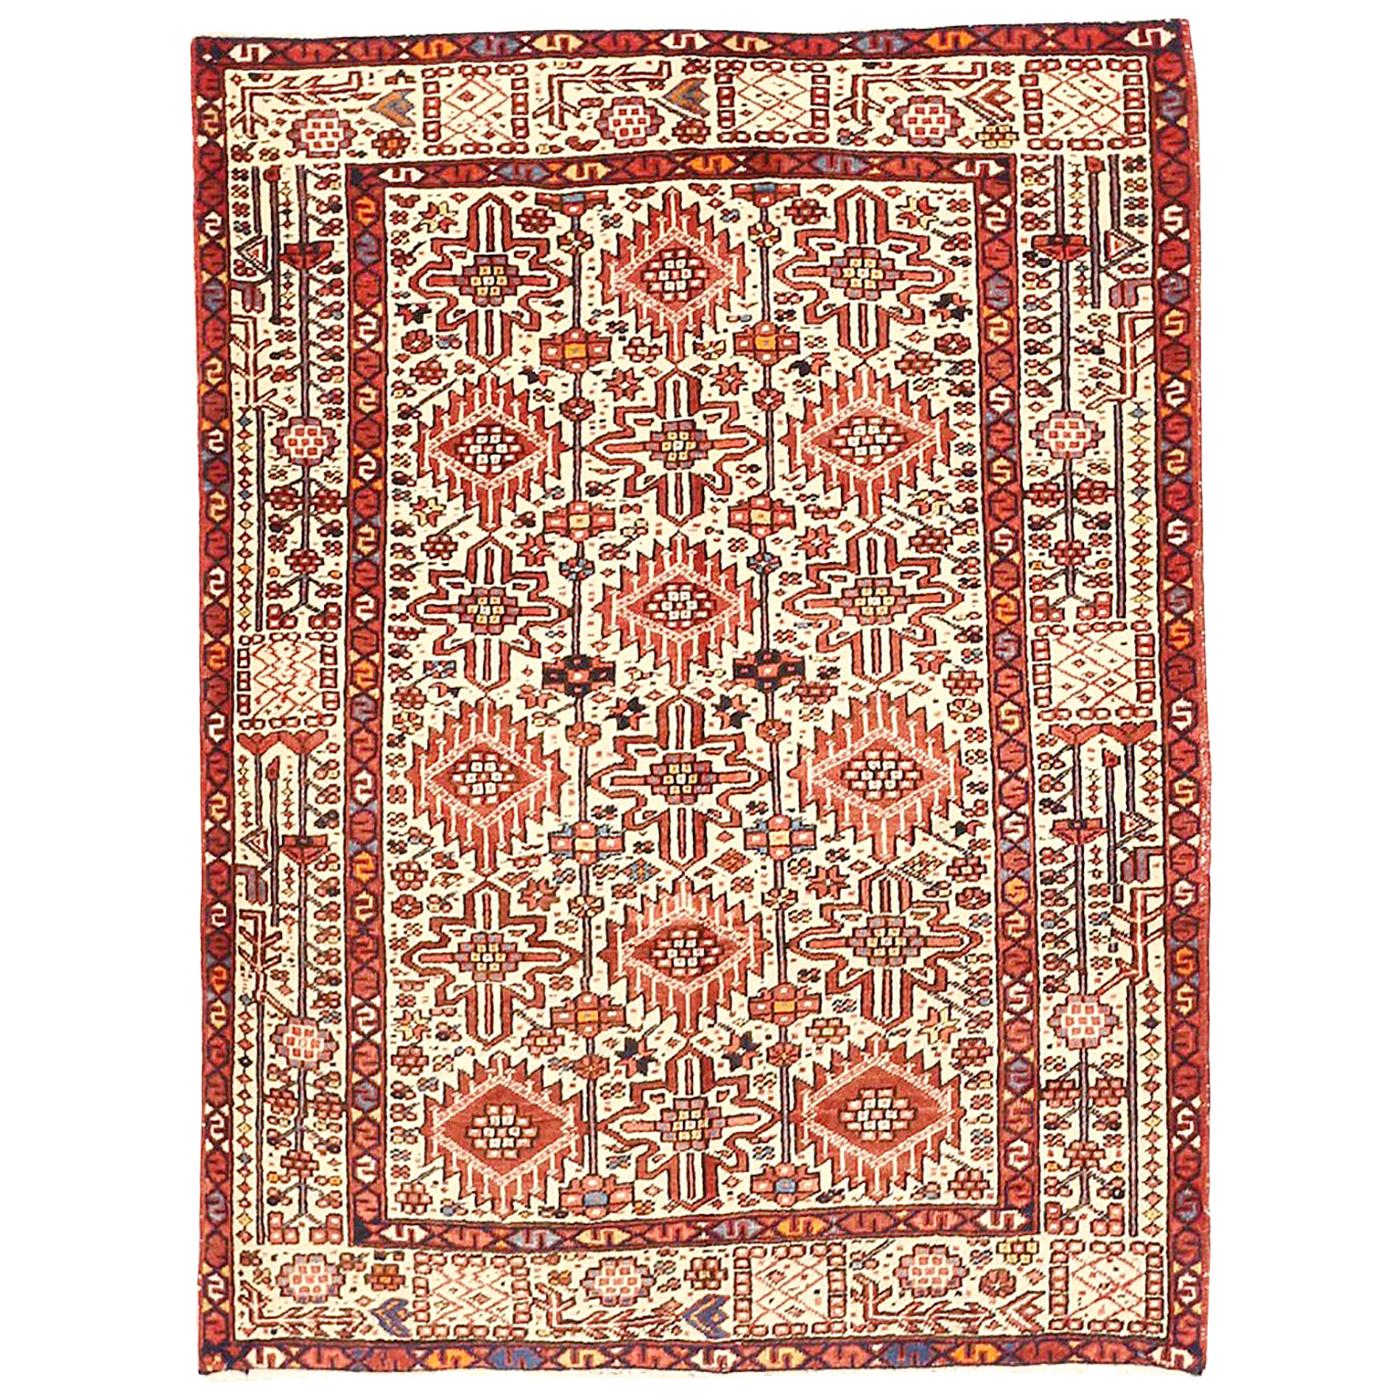 Vintage Persian Heriz Rug with Red and Black Flower Motifs on Ivory Field